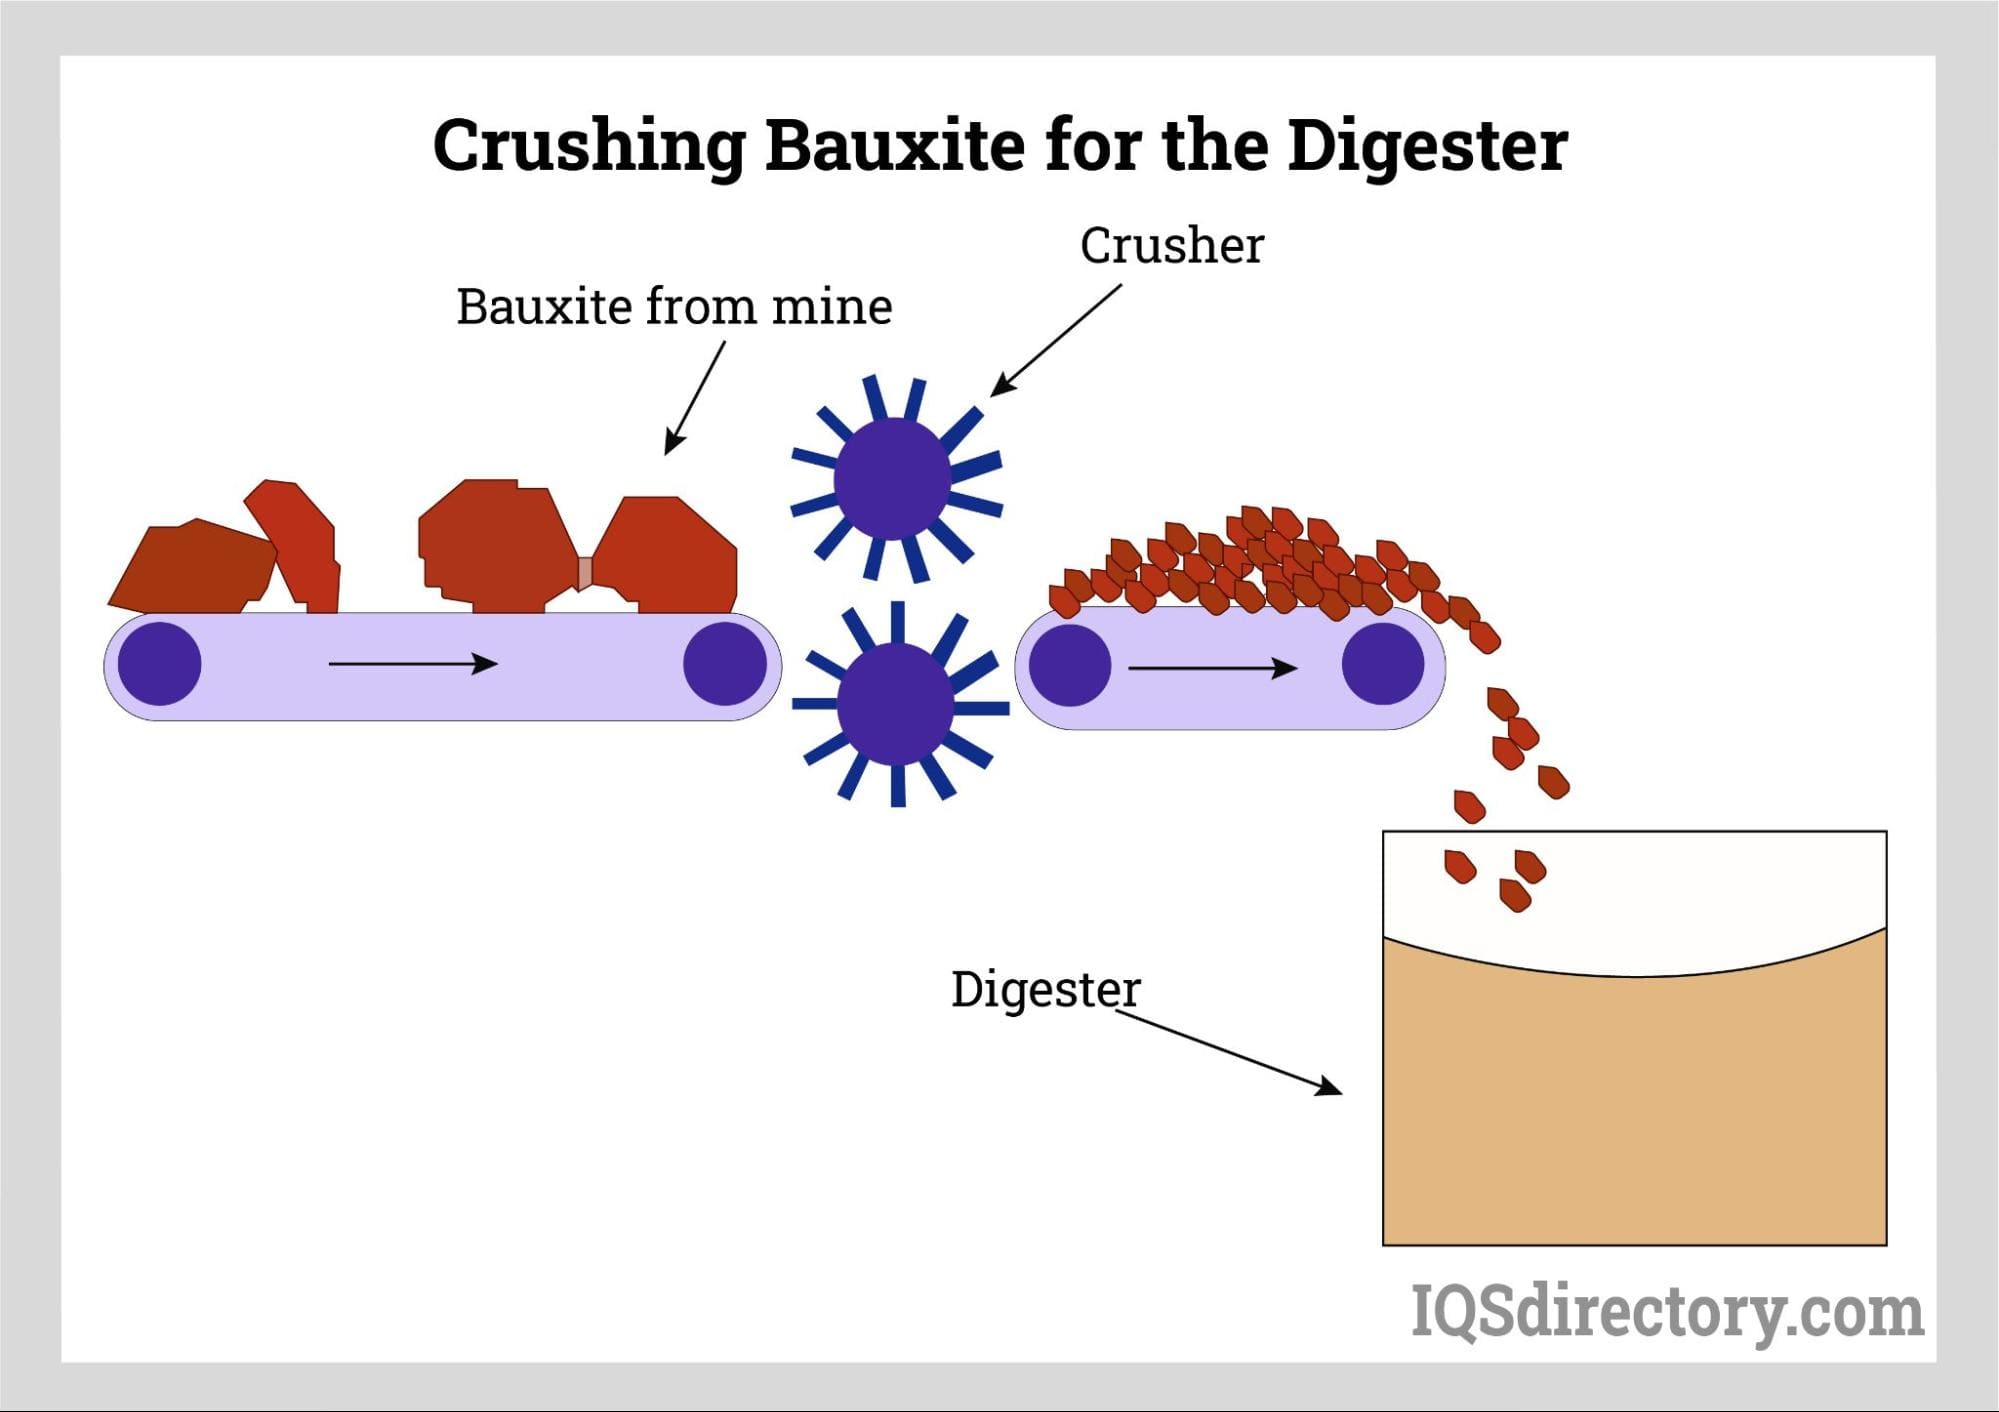 Crushing Bauxite for the Digester